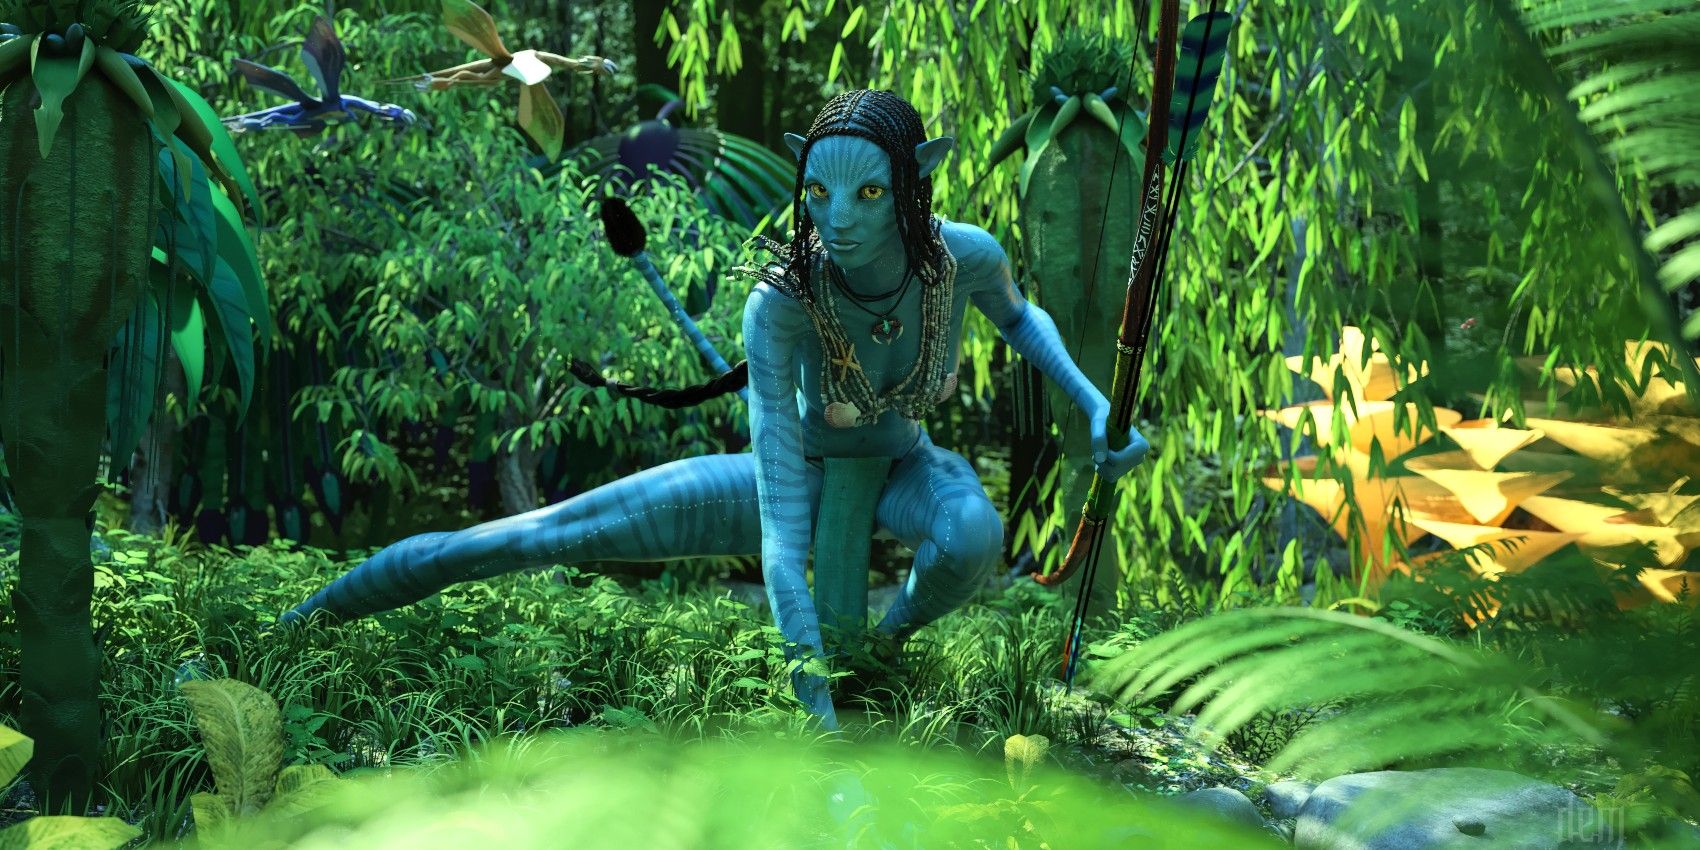 James Cameron & Avatar 2 Cast Lived In The Rainforest For Several Days